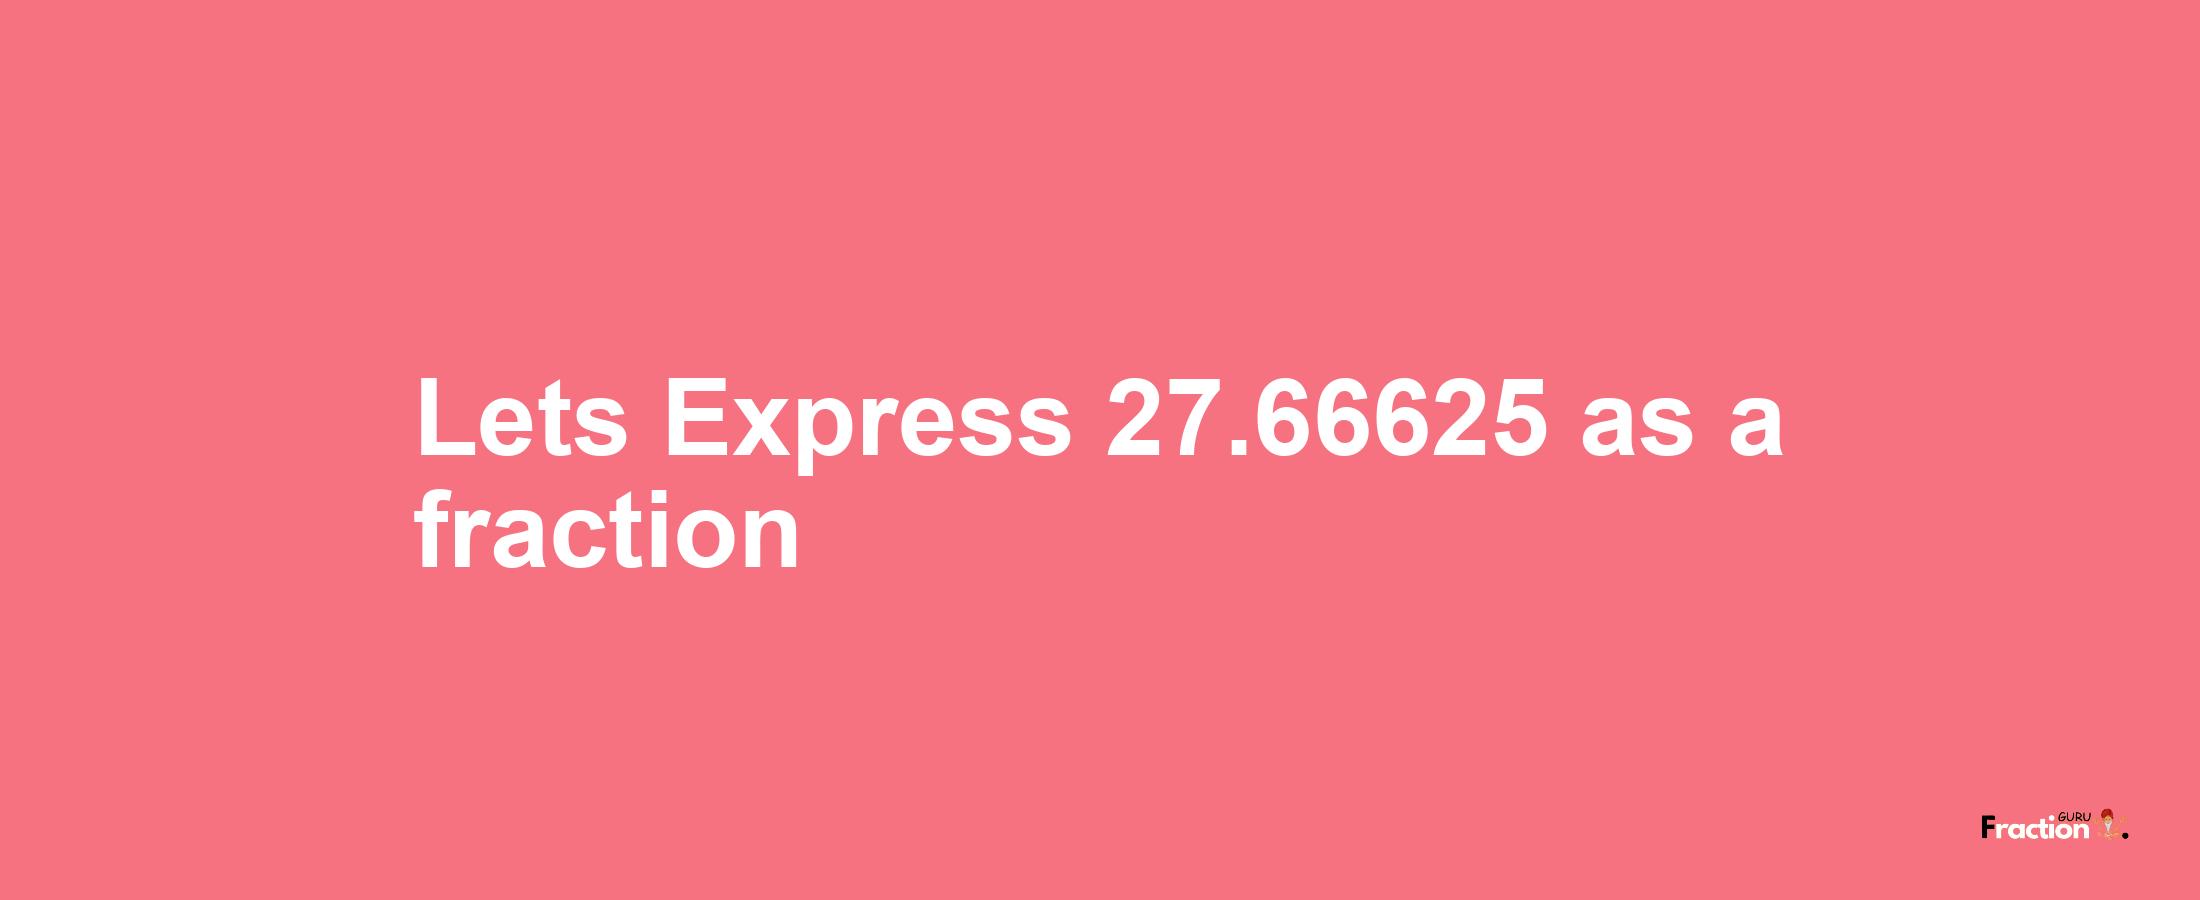 Lets Express 27.66625 as afraction